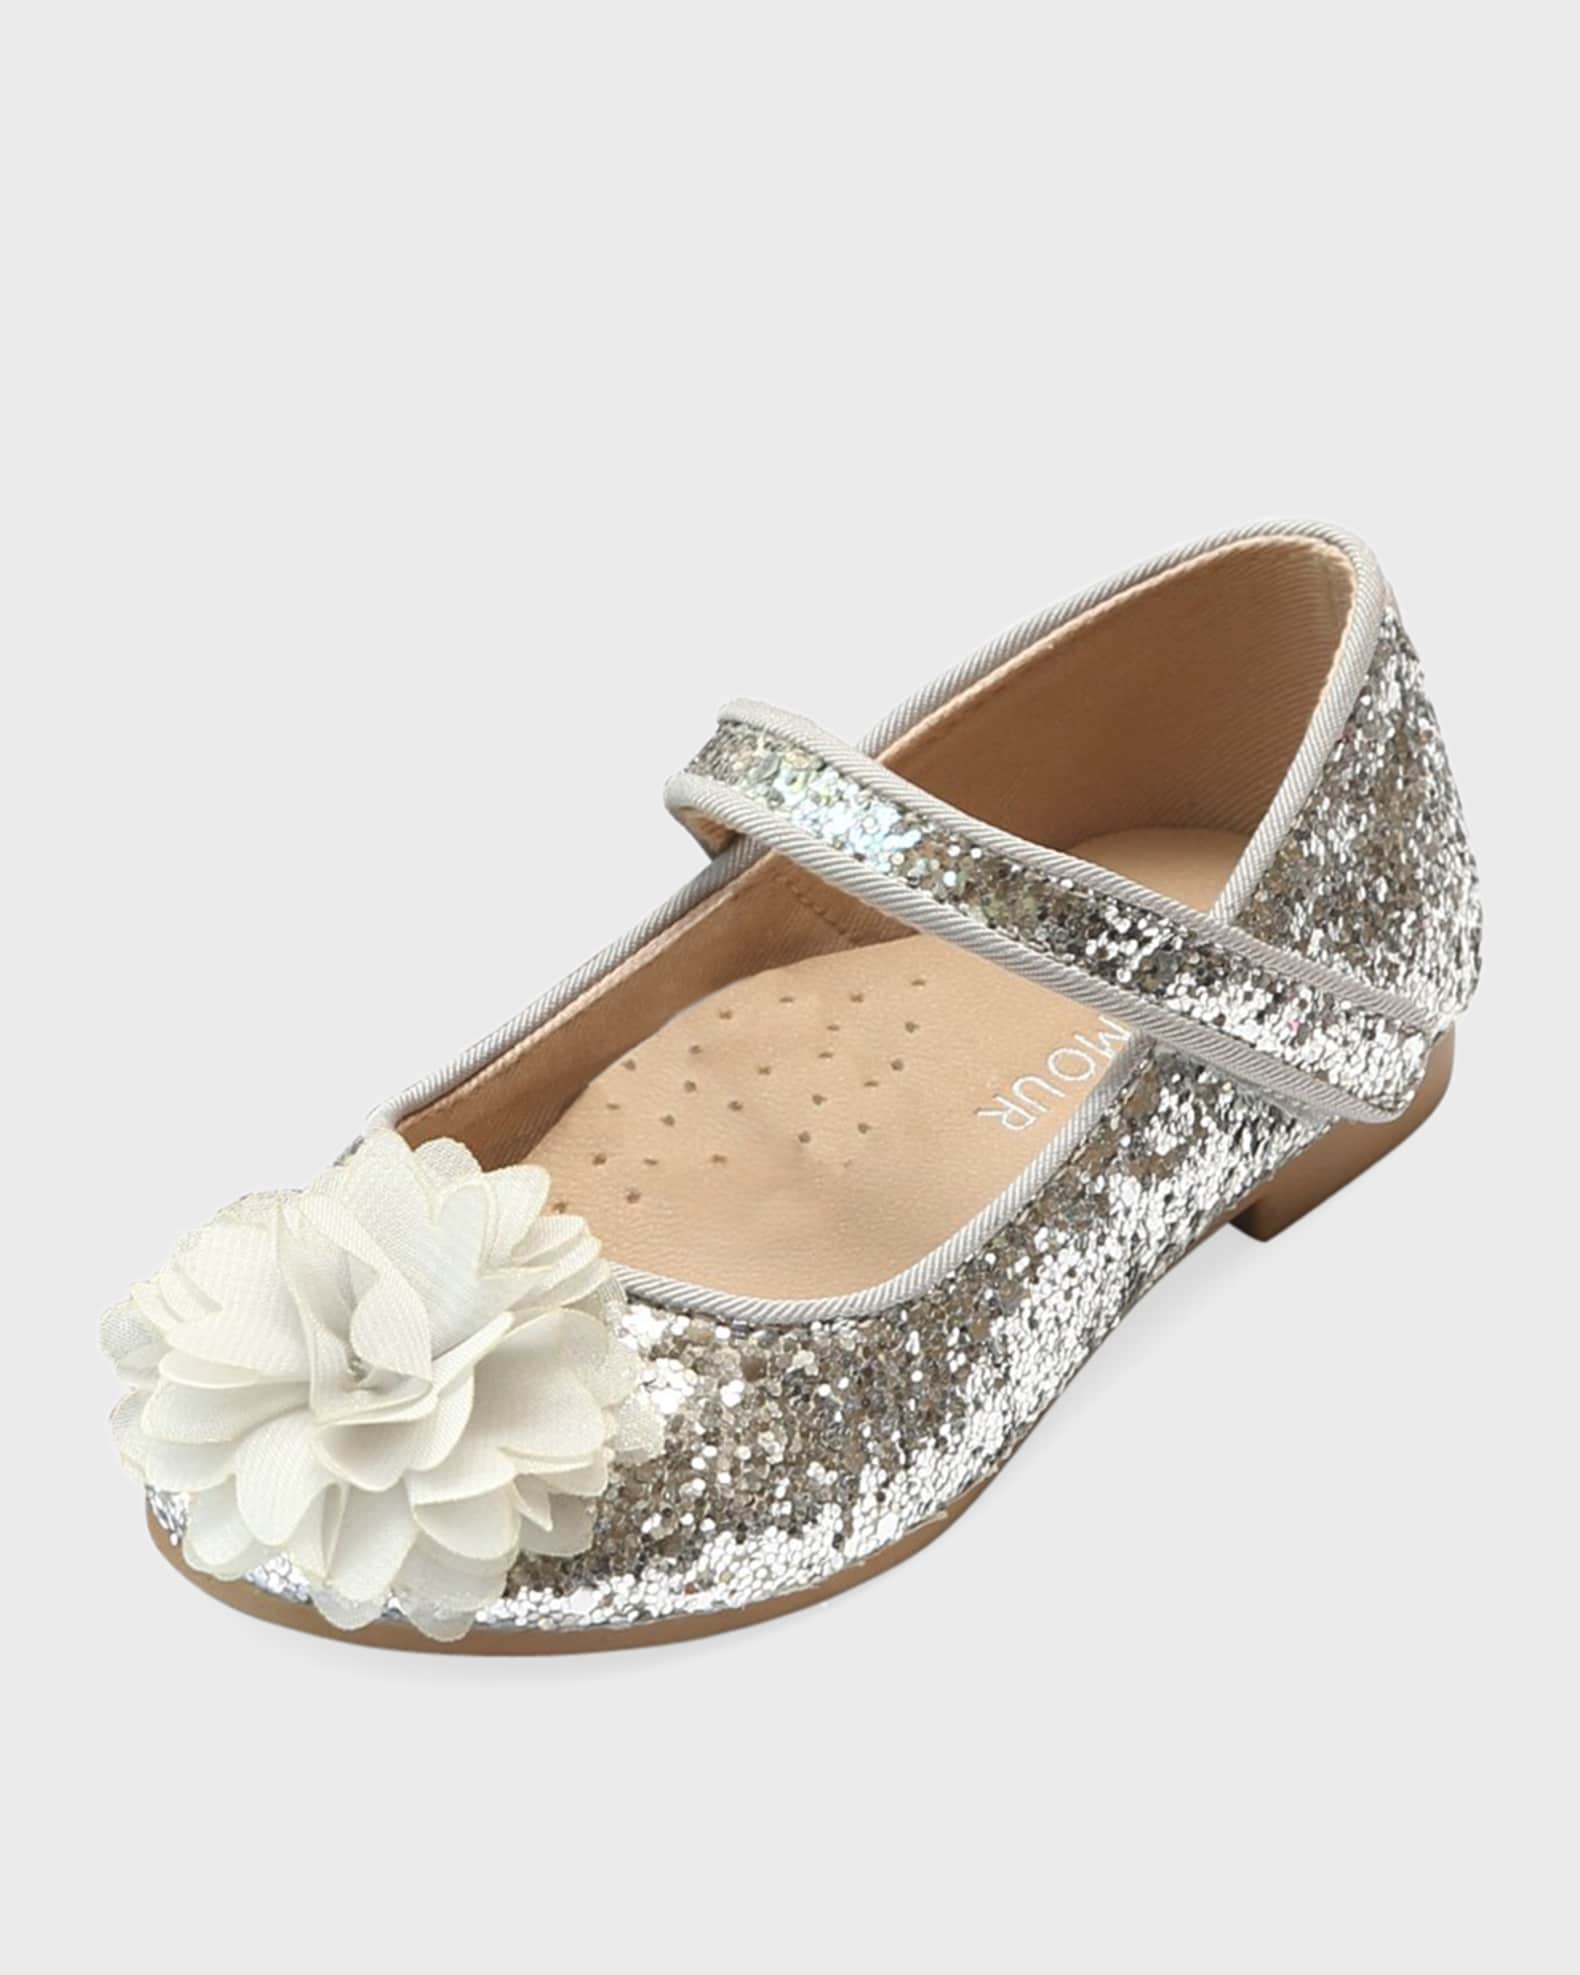 L'Amour Shoes Girl's Alice Sparkly Glitter Flower Flats, Baby/Toddler ...